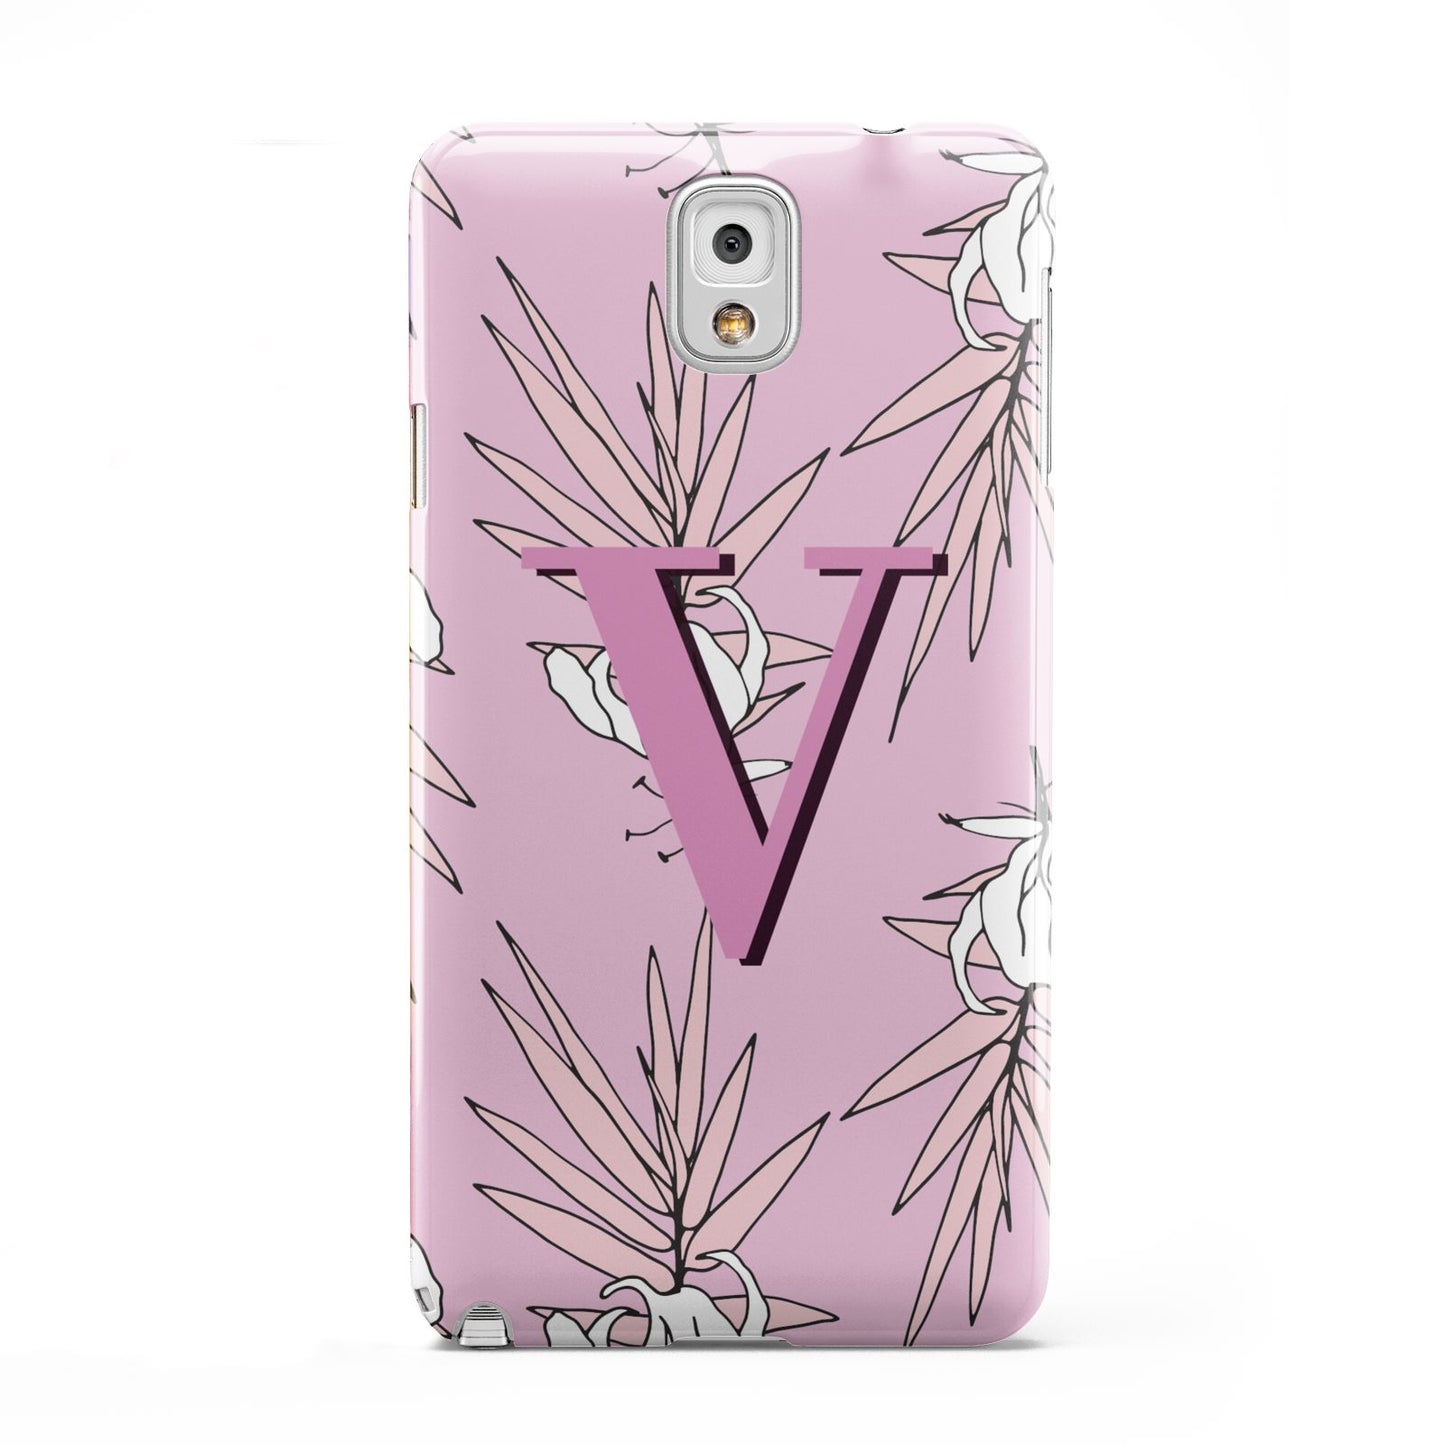 Personalised Pink and White Floral Monogram Samsung Galaxy Note 3 Case